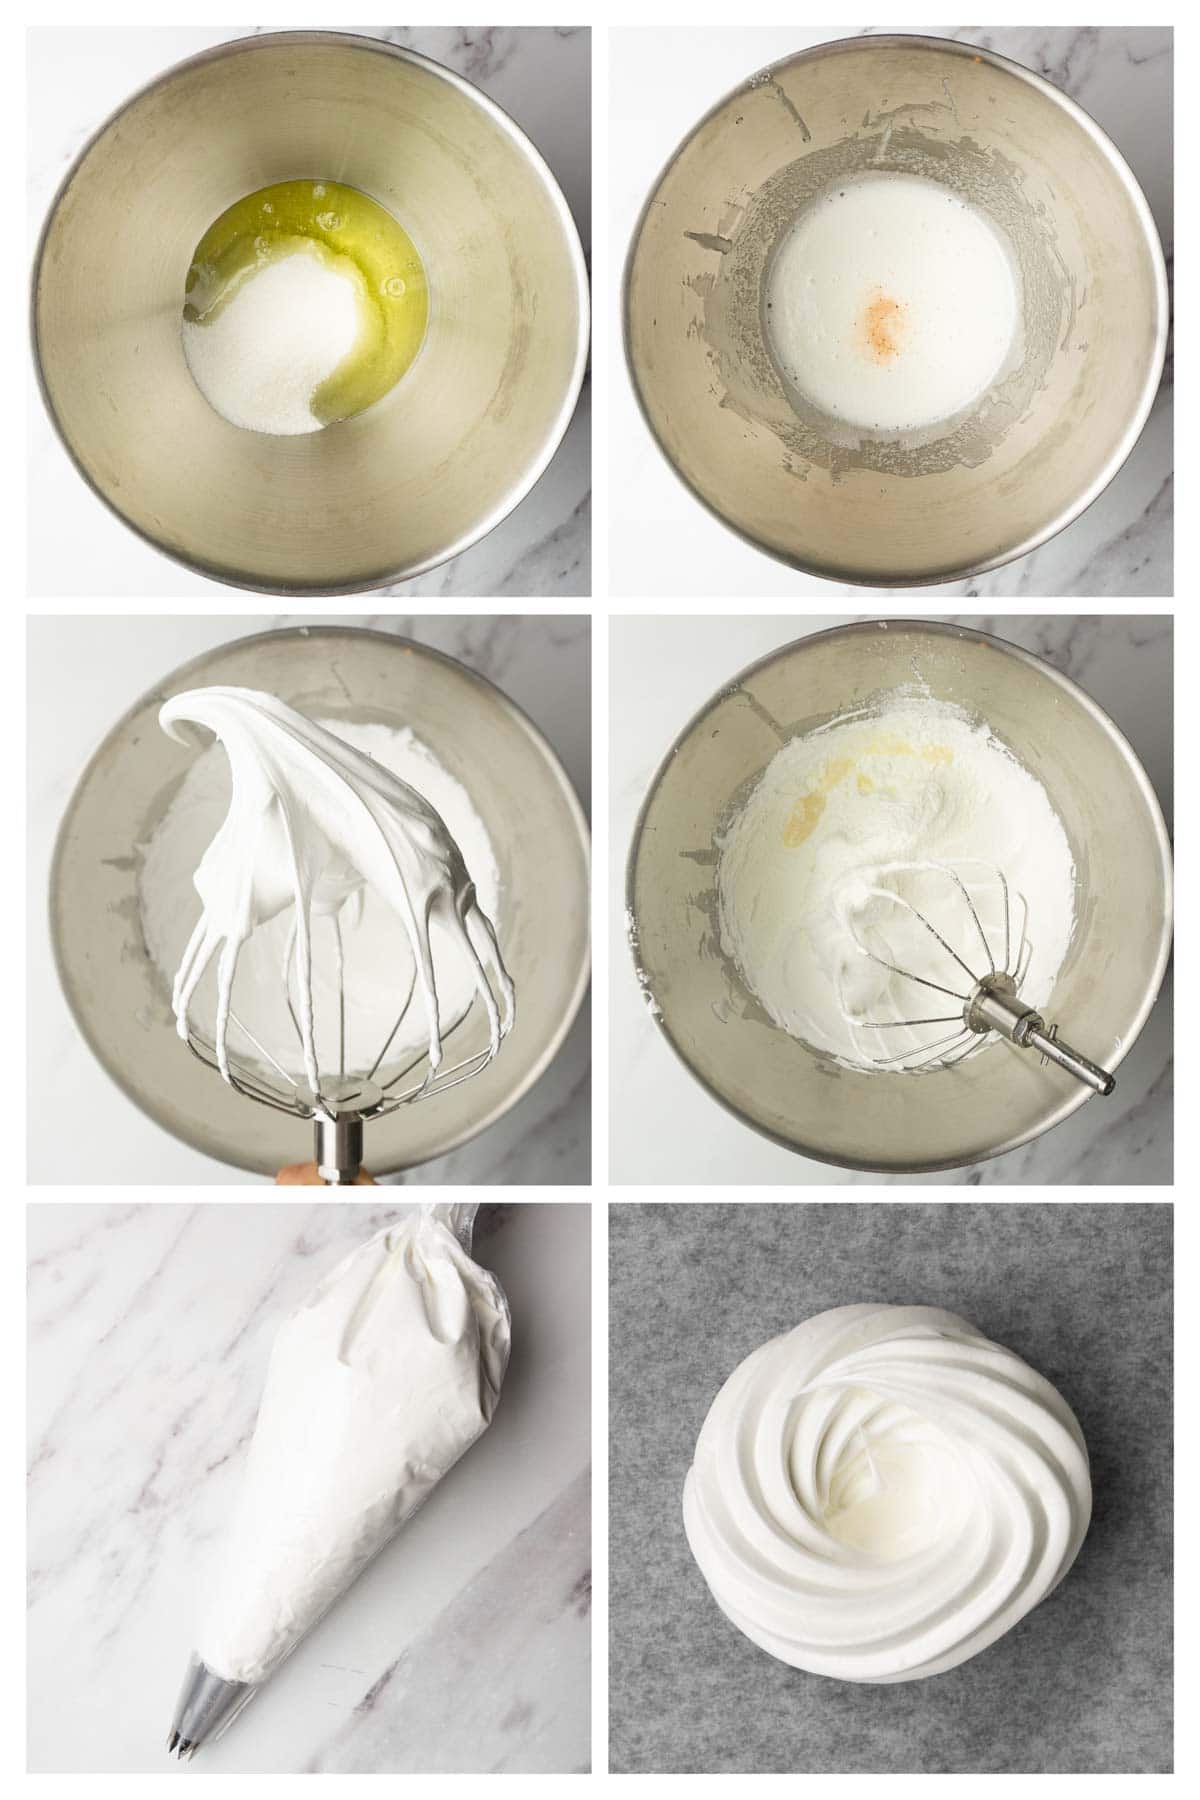 Collage image showing step by step directions to make Swiss meringue for mini pavlovas.